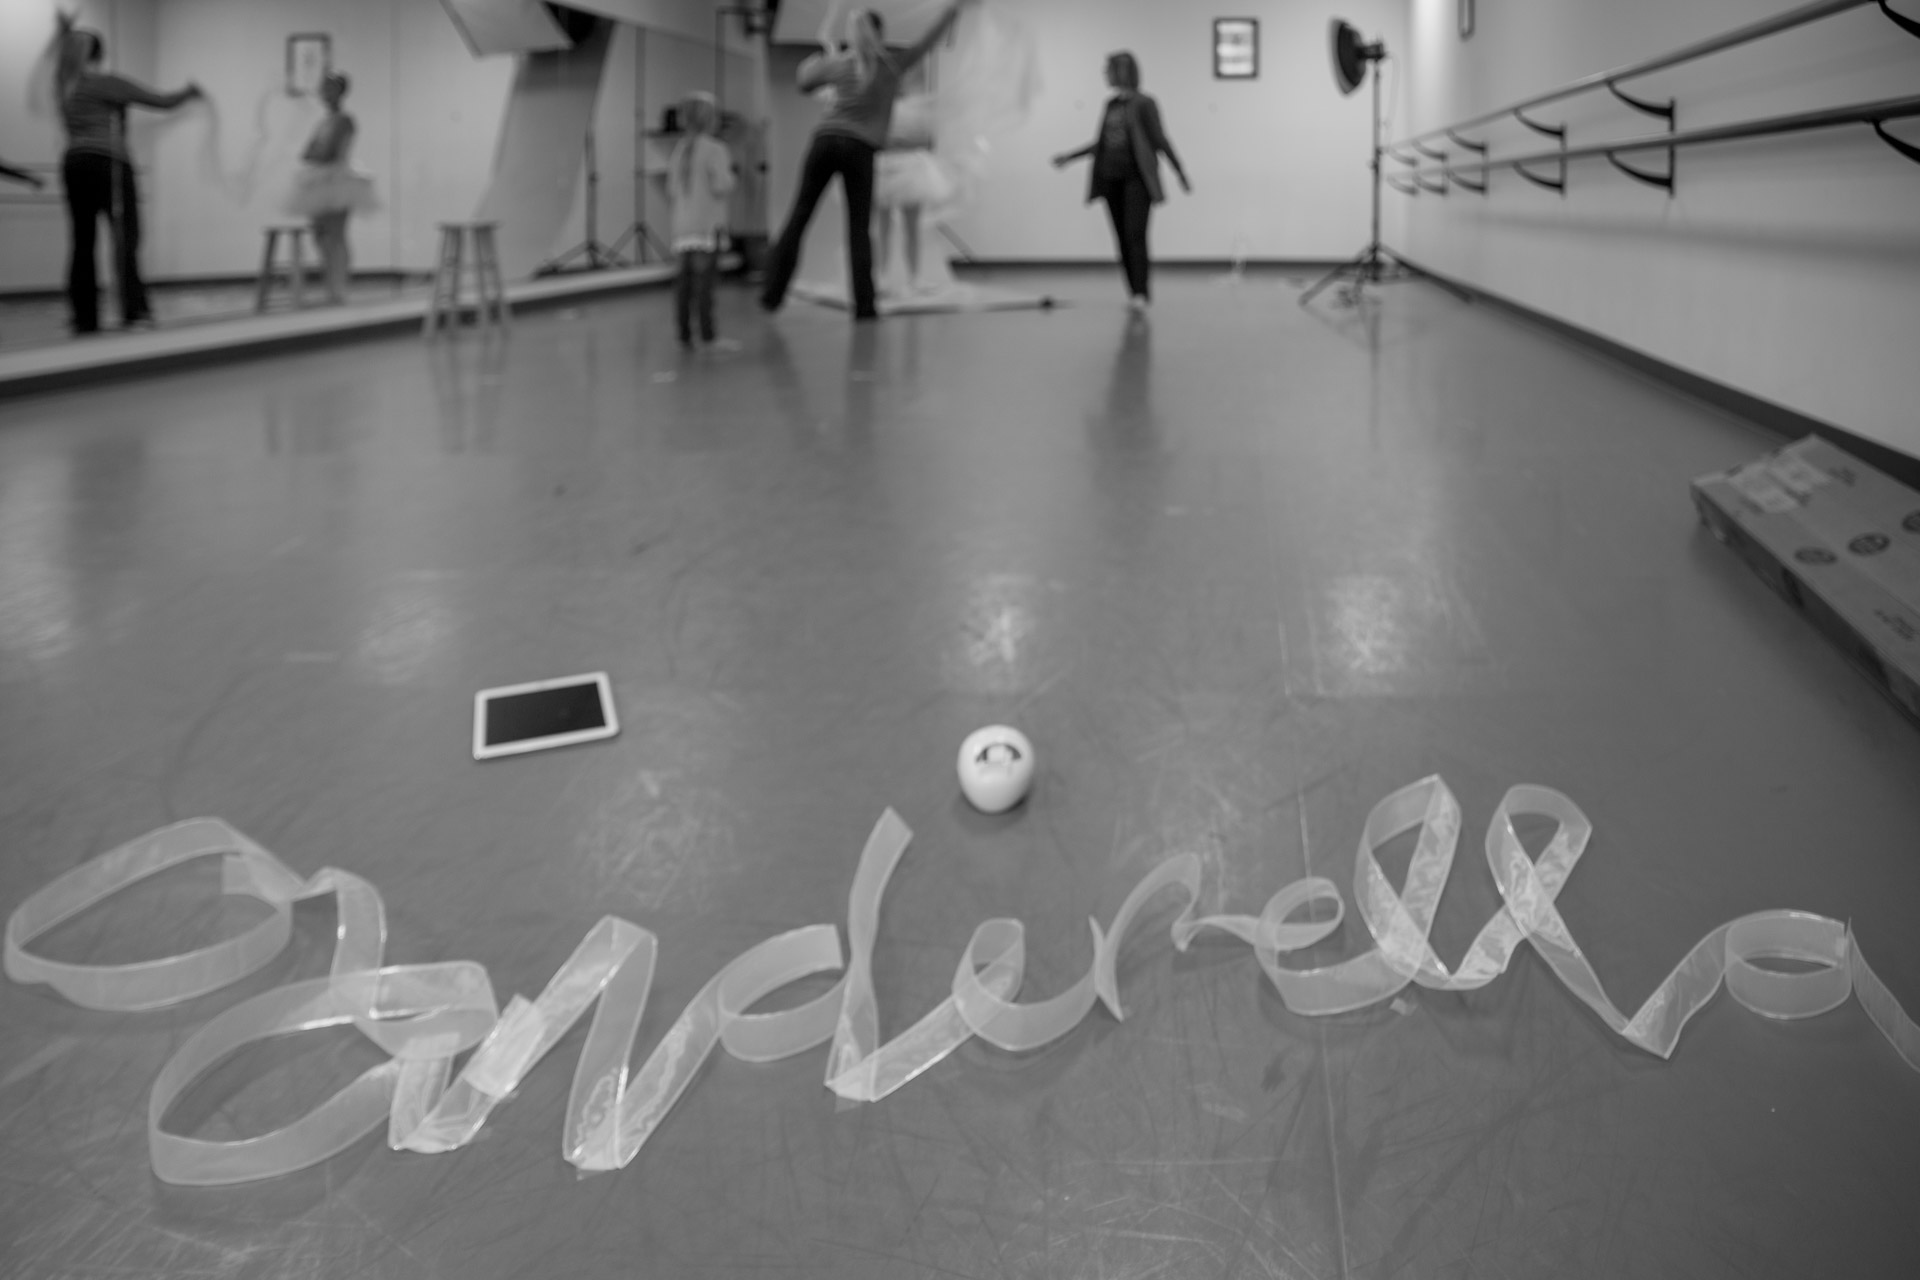 The word Cinderella made from ribbon on floor of dance studio with women in background preparing set